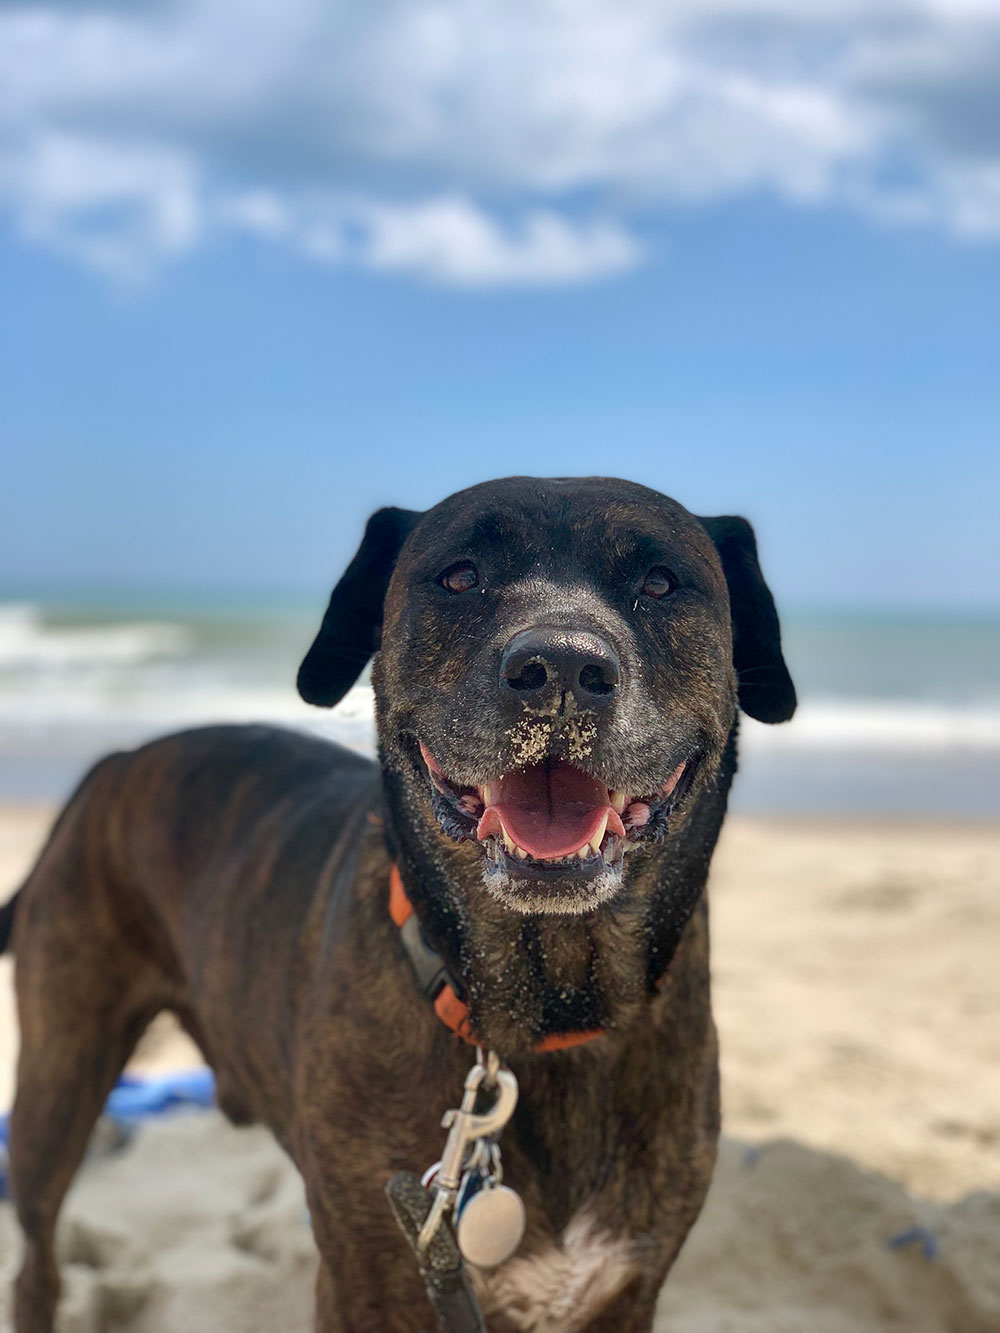 Oliver is a 10-year-old mutt who is pure love. Rescued out of Durham from Hope Animal Rescue, he stole our hearts at first glance. He loves to hike, go to the beach, and spend every Sunday at Two Roosters Ice cream ... his favorite treat. - Rebekah and David